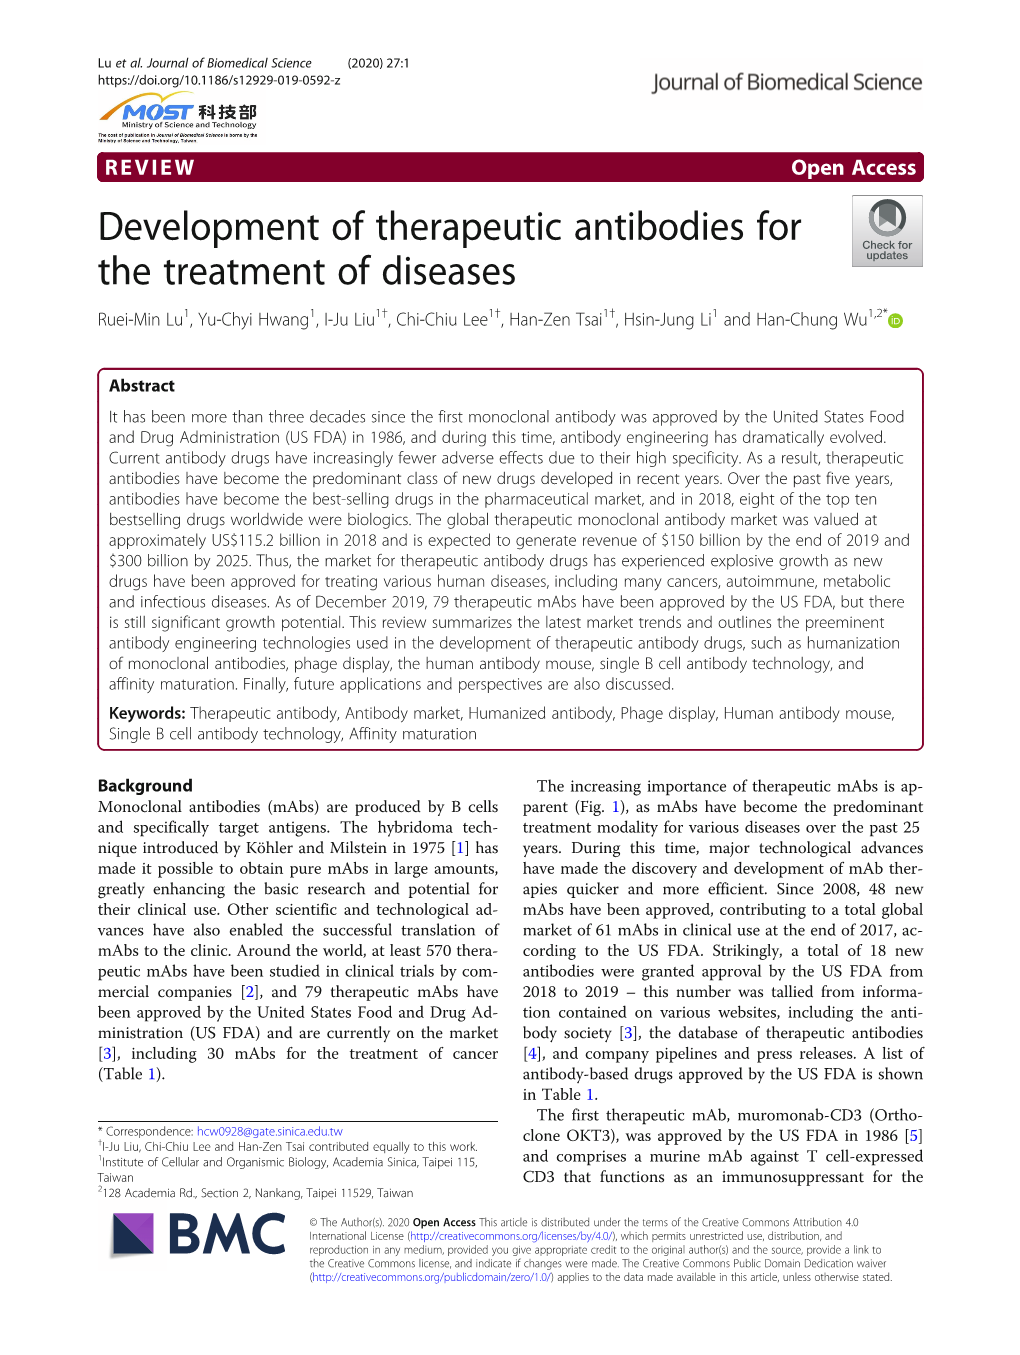 Development of Therapeutic Antibodies for the Treatment Of